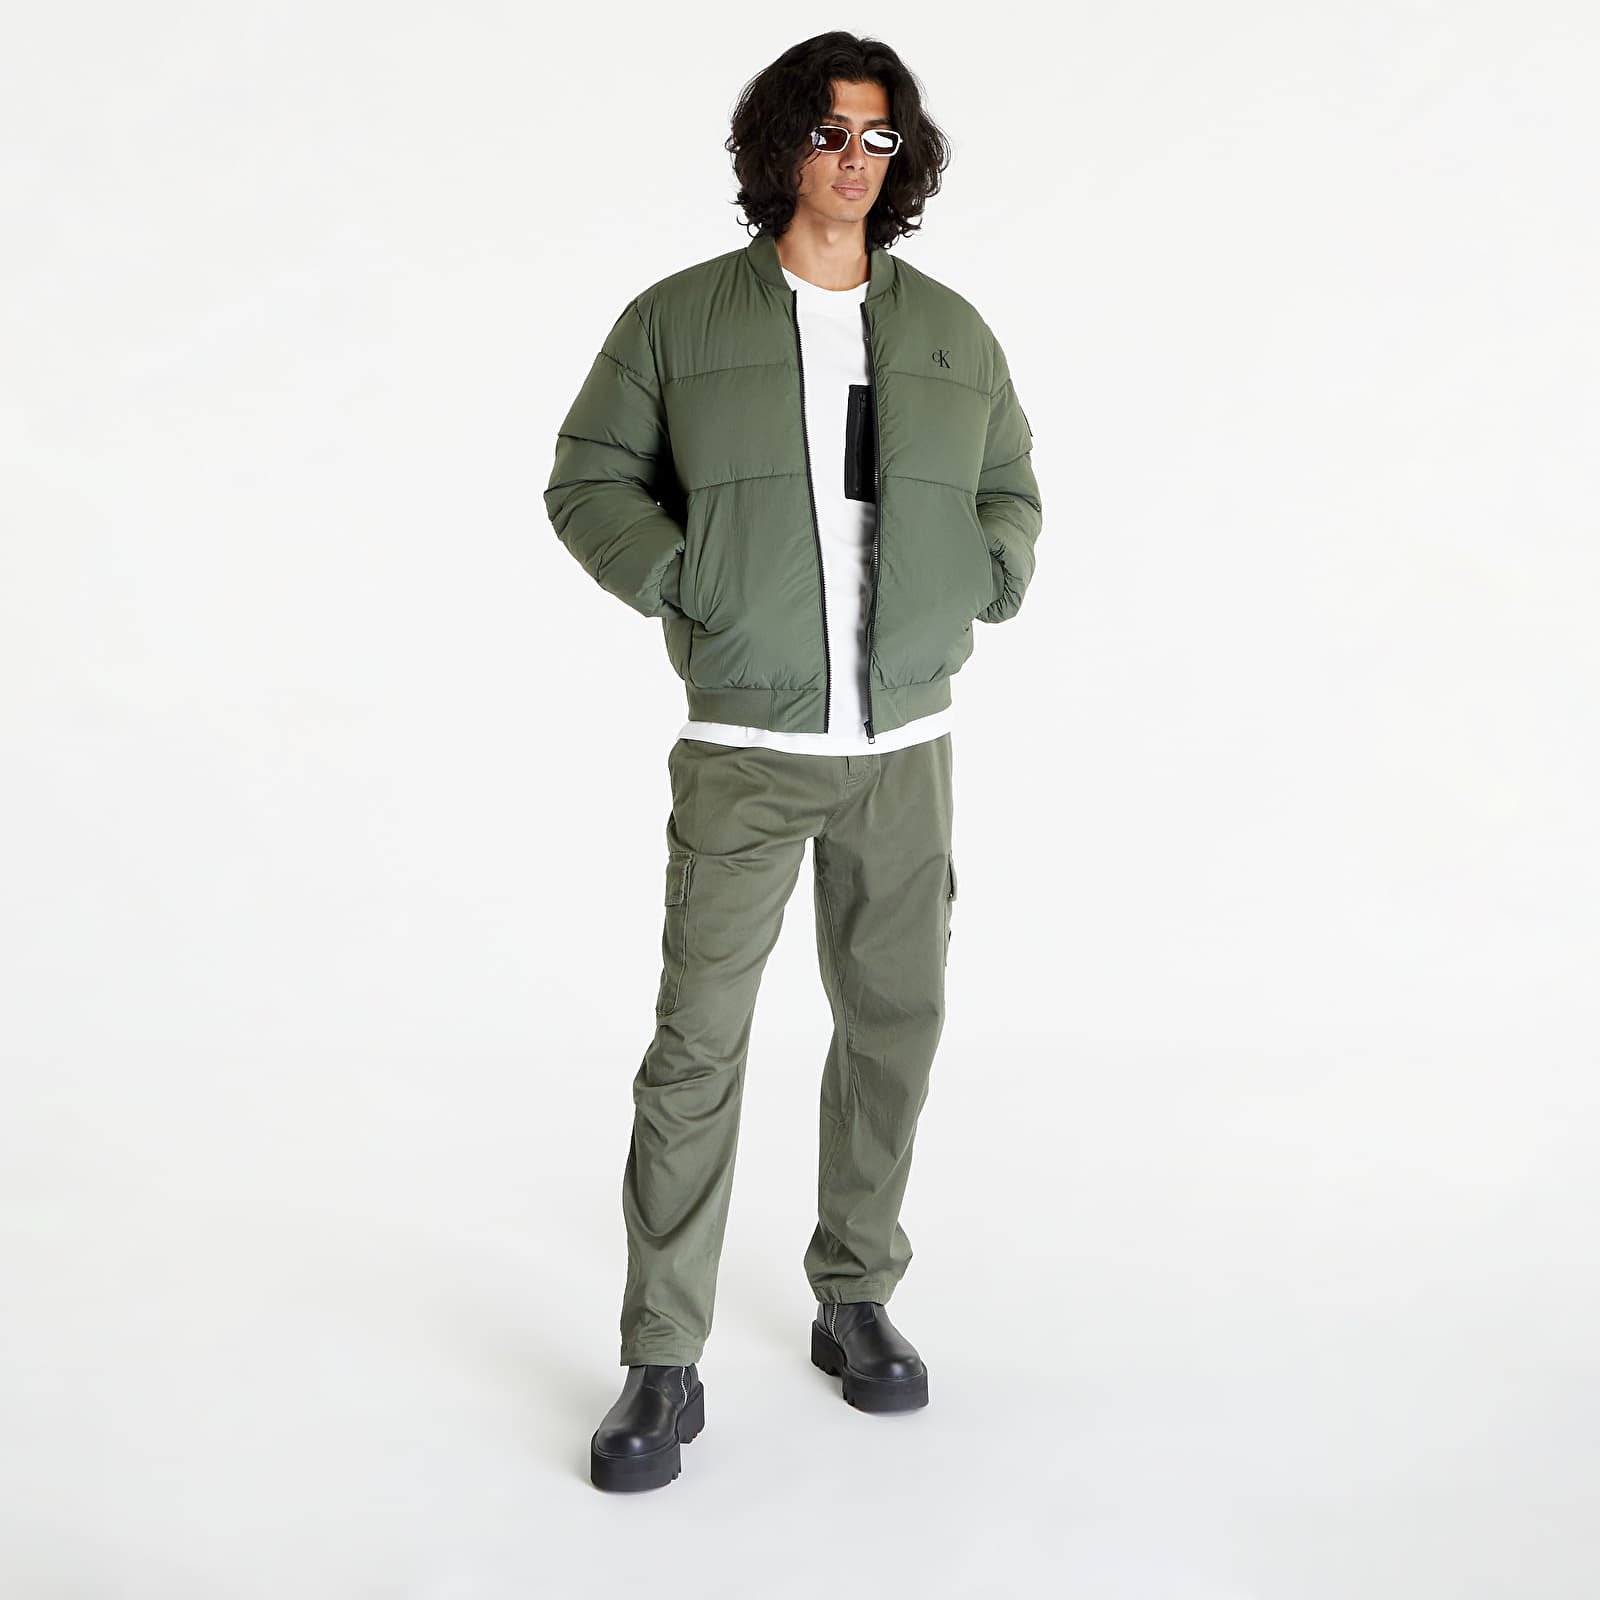 Jeans Commercial Bomber Jacket Green